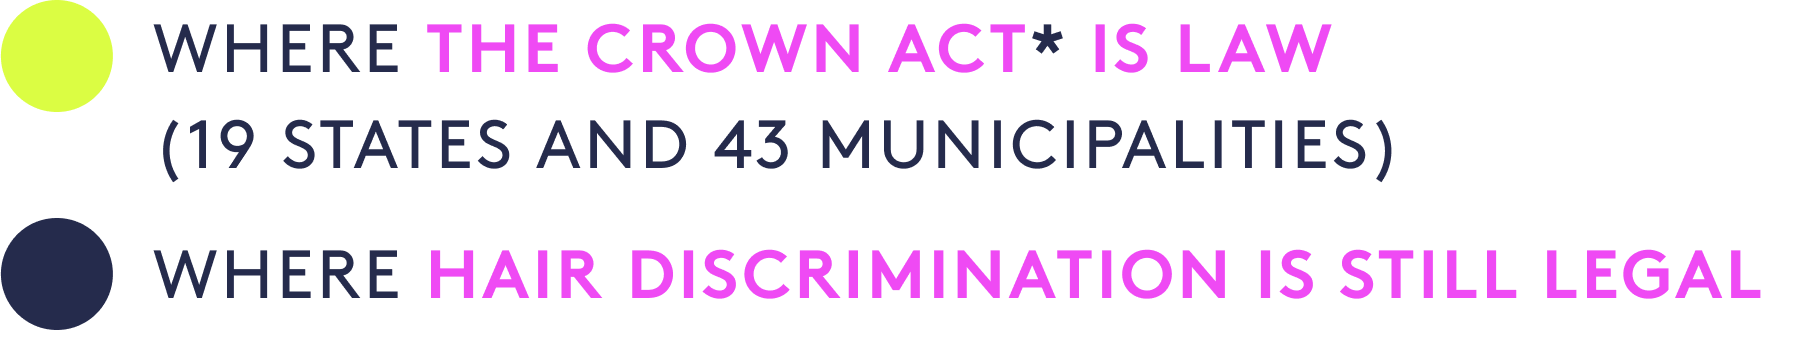 Where the Crown Act is law * (18 states and 43 municipalities). Where hair discrimination is still legal.